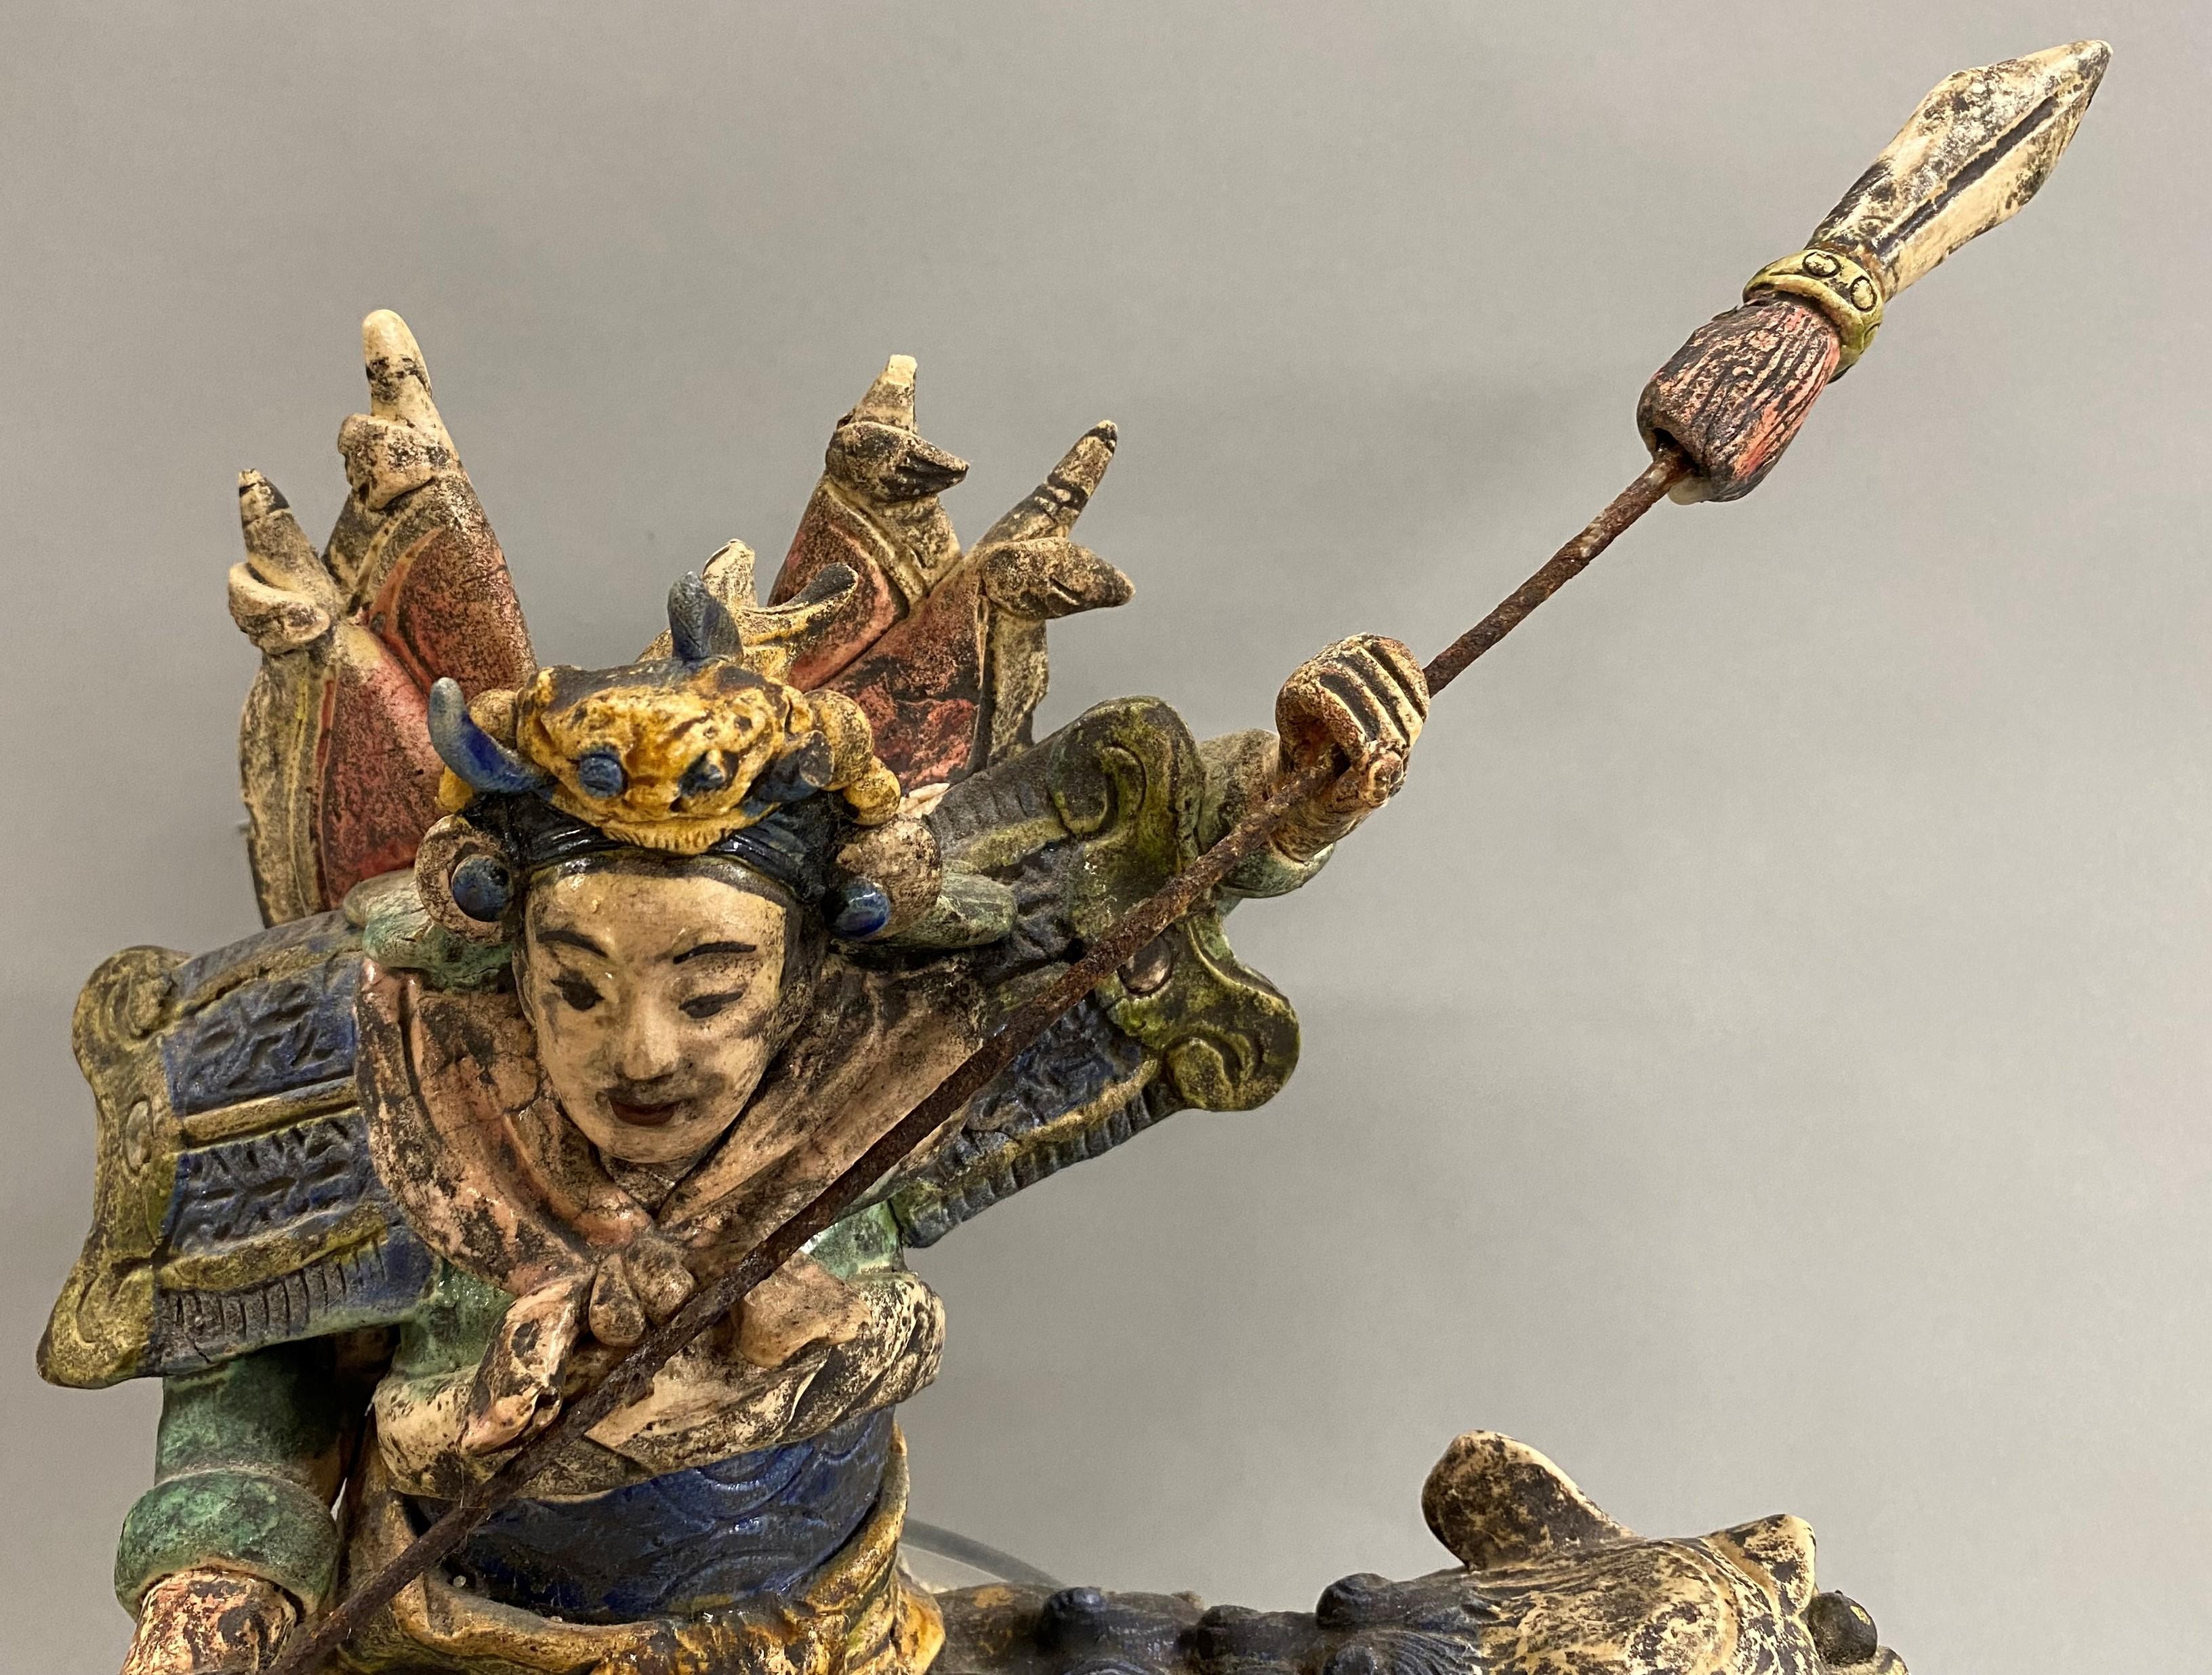 A fine Chinese Ming style polychrome ceramic roof tile fragment of a warrior on a dragon with metal spear, nicely mounted to a custom solid acrylic stand. Probably dates to the 18th/19th century in good overall condition, with some high point